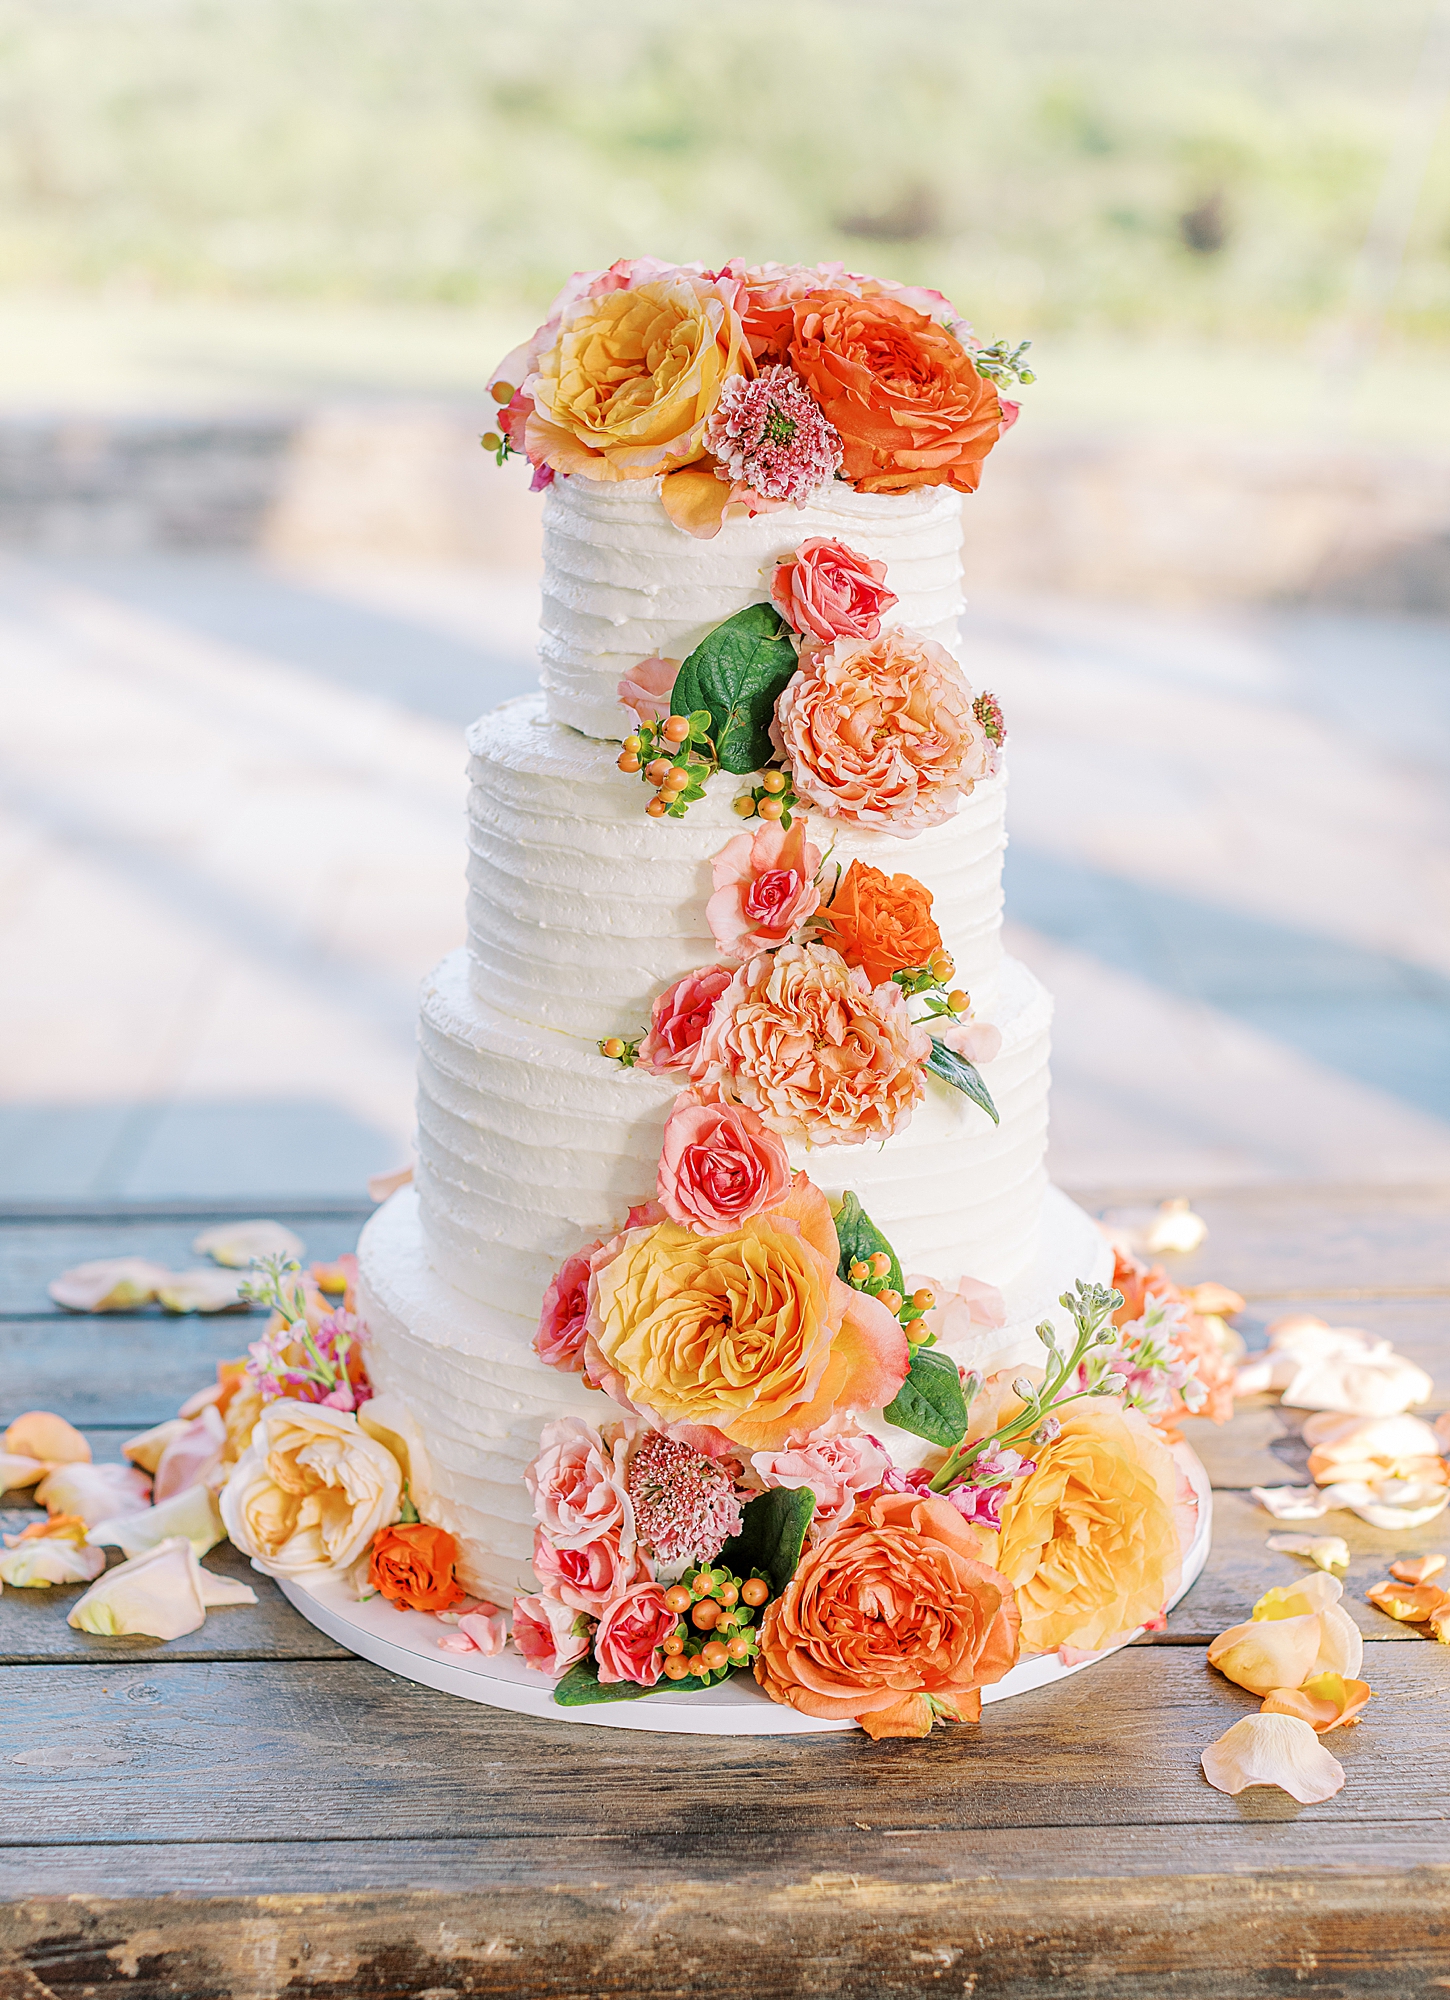 Colorful wedding cake with flowers.